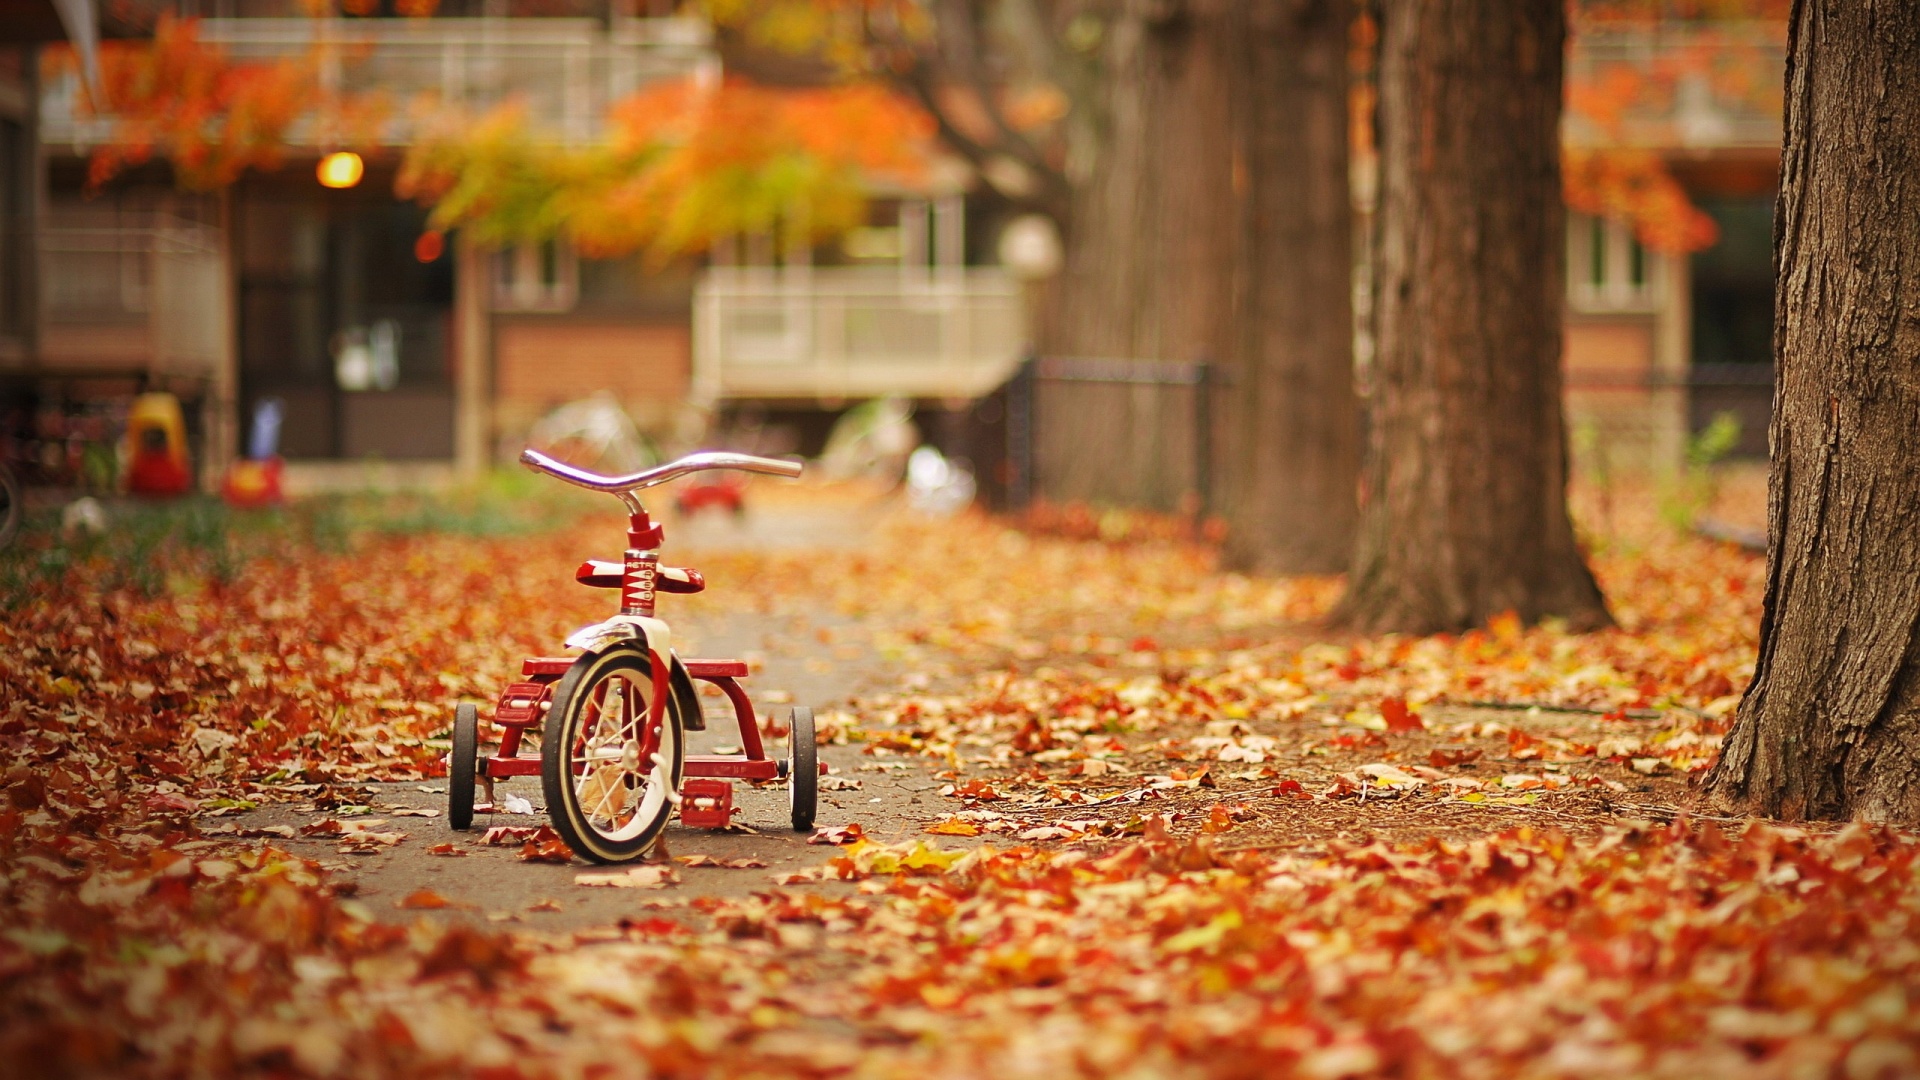 K#tricycle Autumn Wallpaper Hd Wallpapers - Childhood Park , HD Wallpaper & Backgrounds